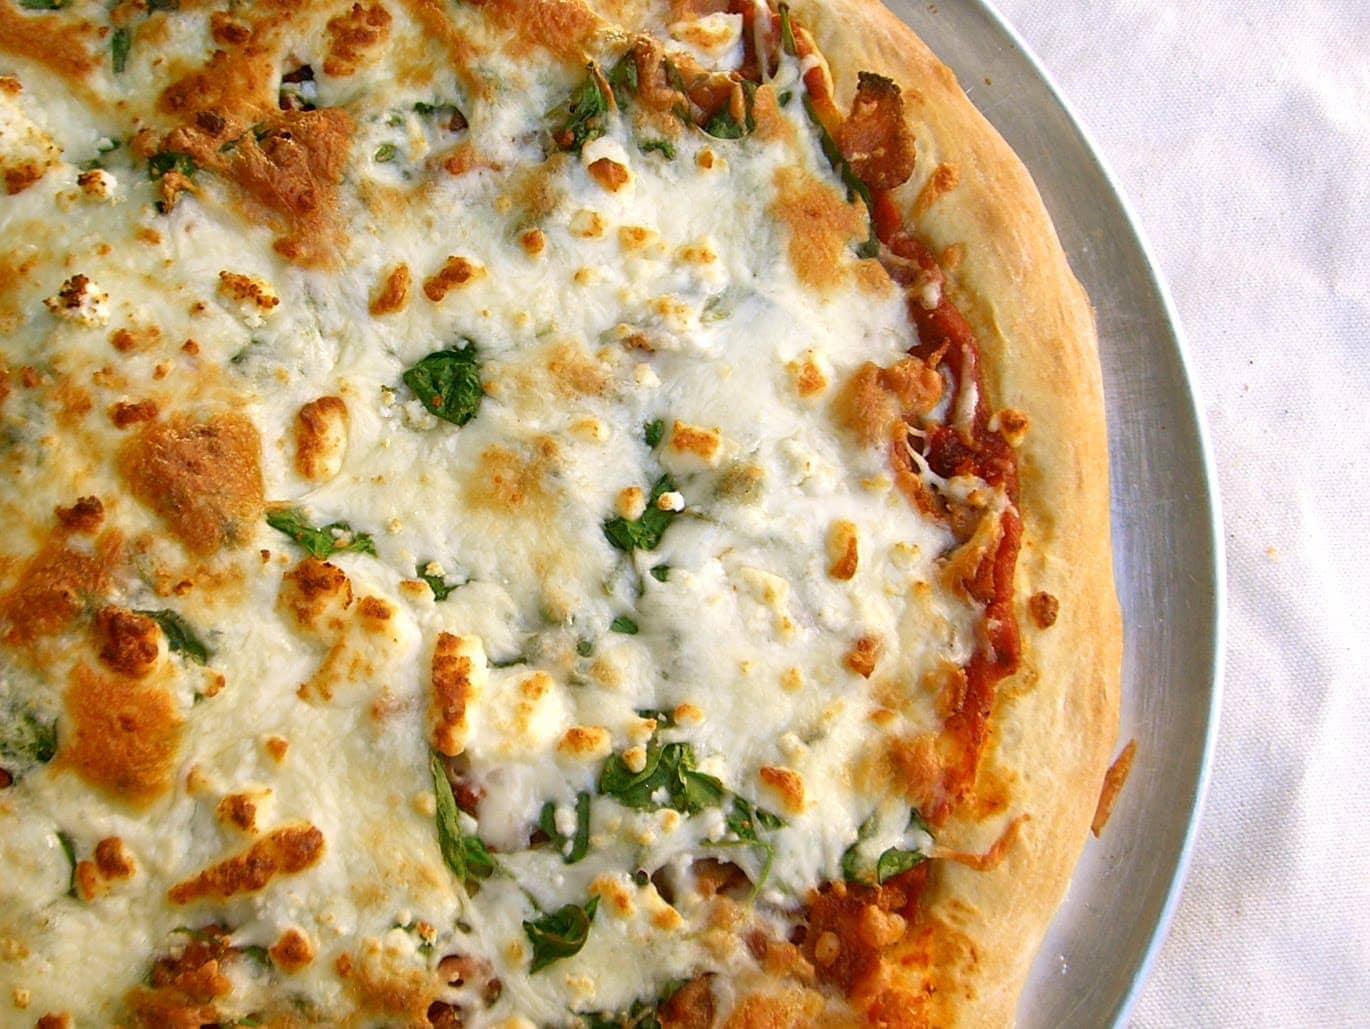 What Flavor Are You? Spinach and feta pizza